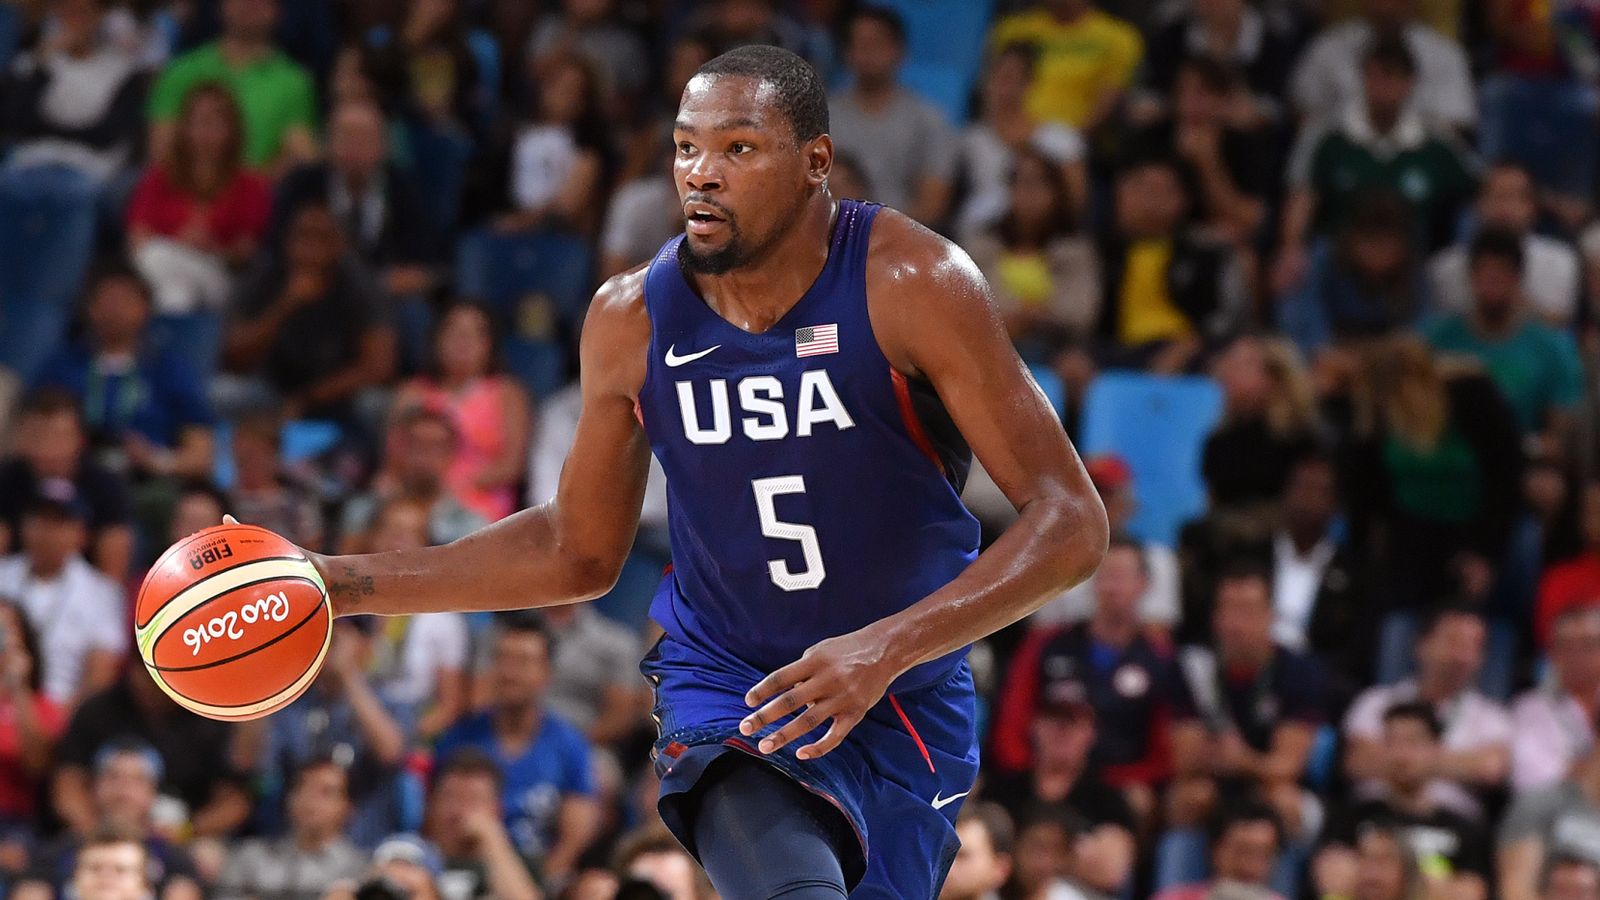 Kevin Durant Devin Booker And Damian Lillard Top Team Usa Men S Basketball Roster For The Tokyo Olympics Nba News Insider Voice